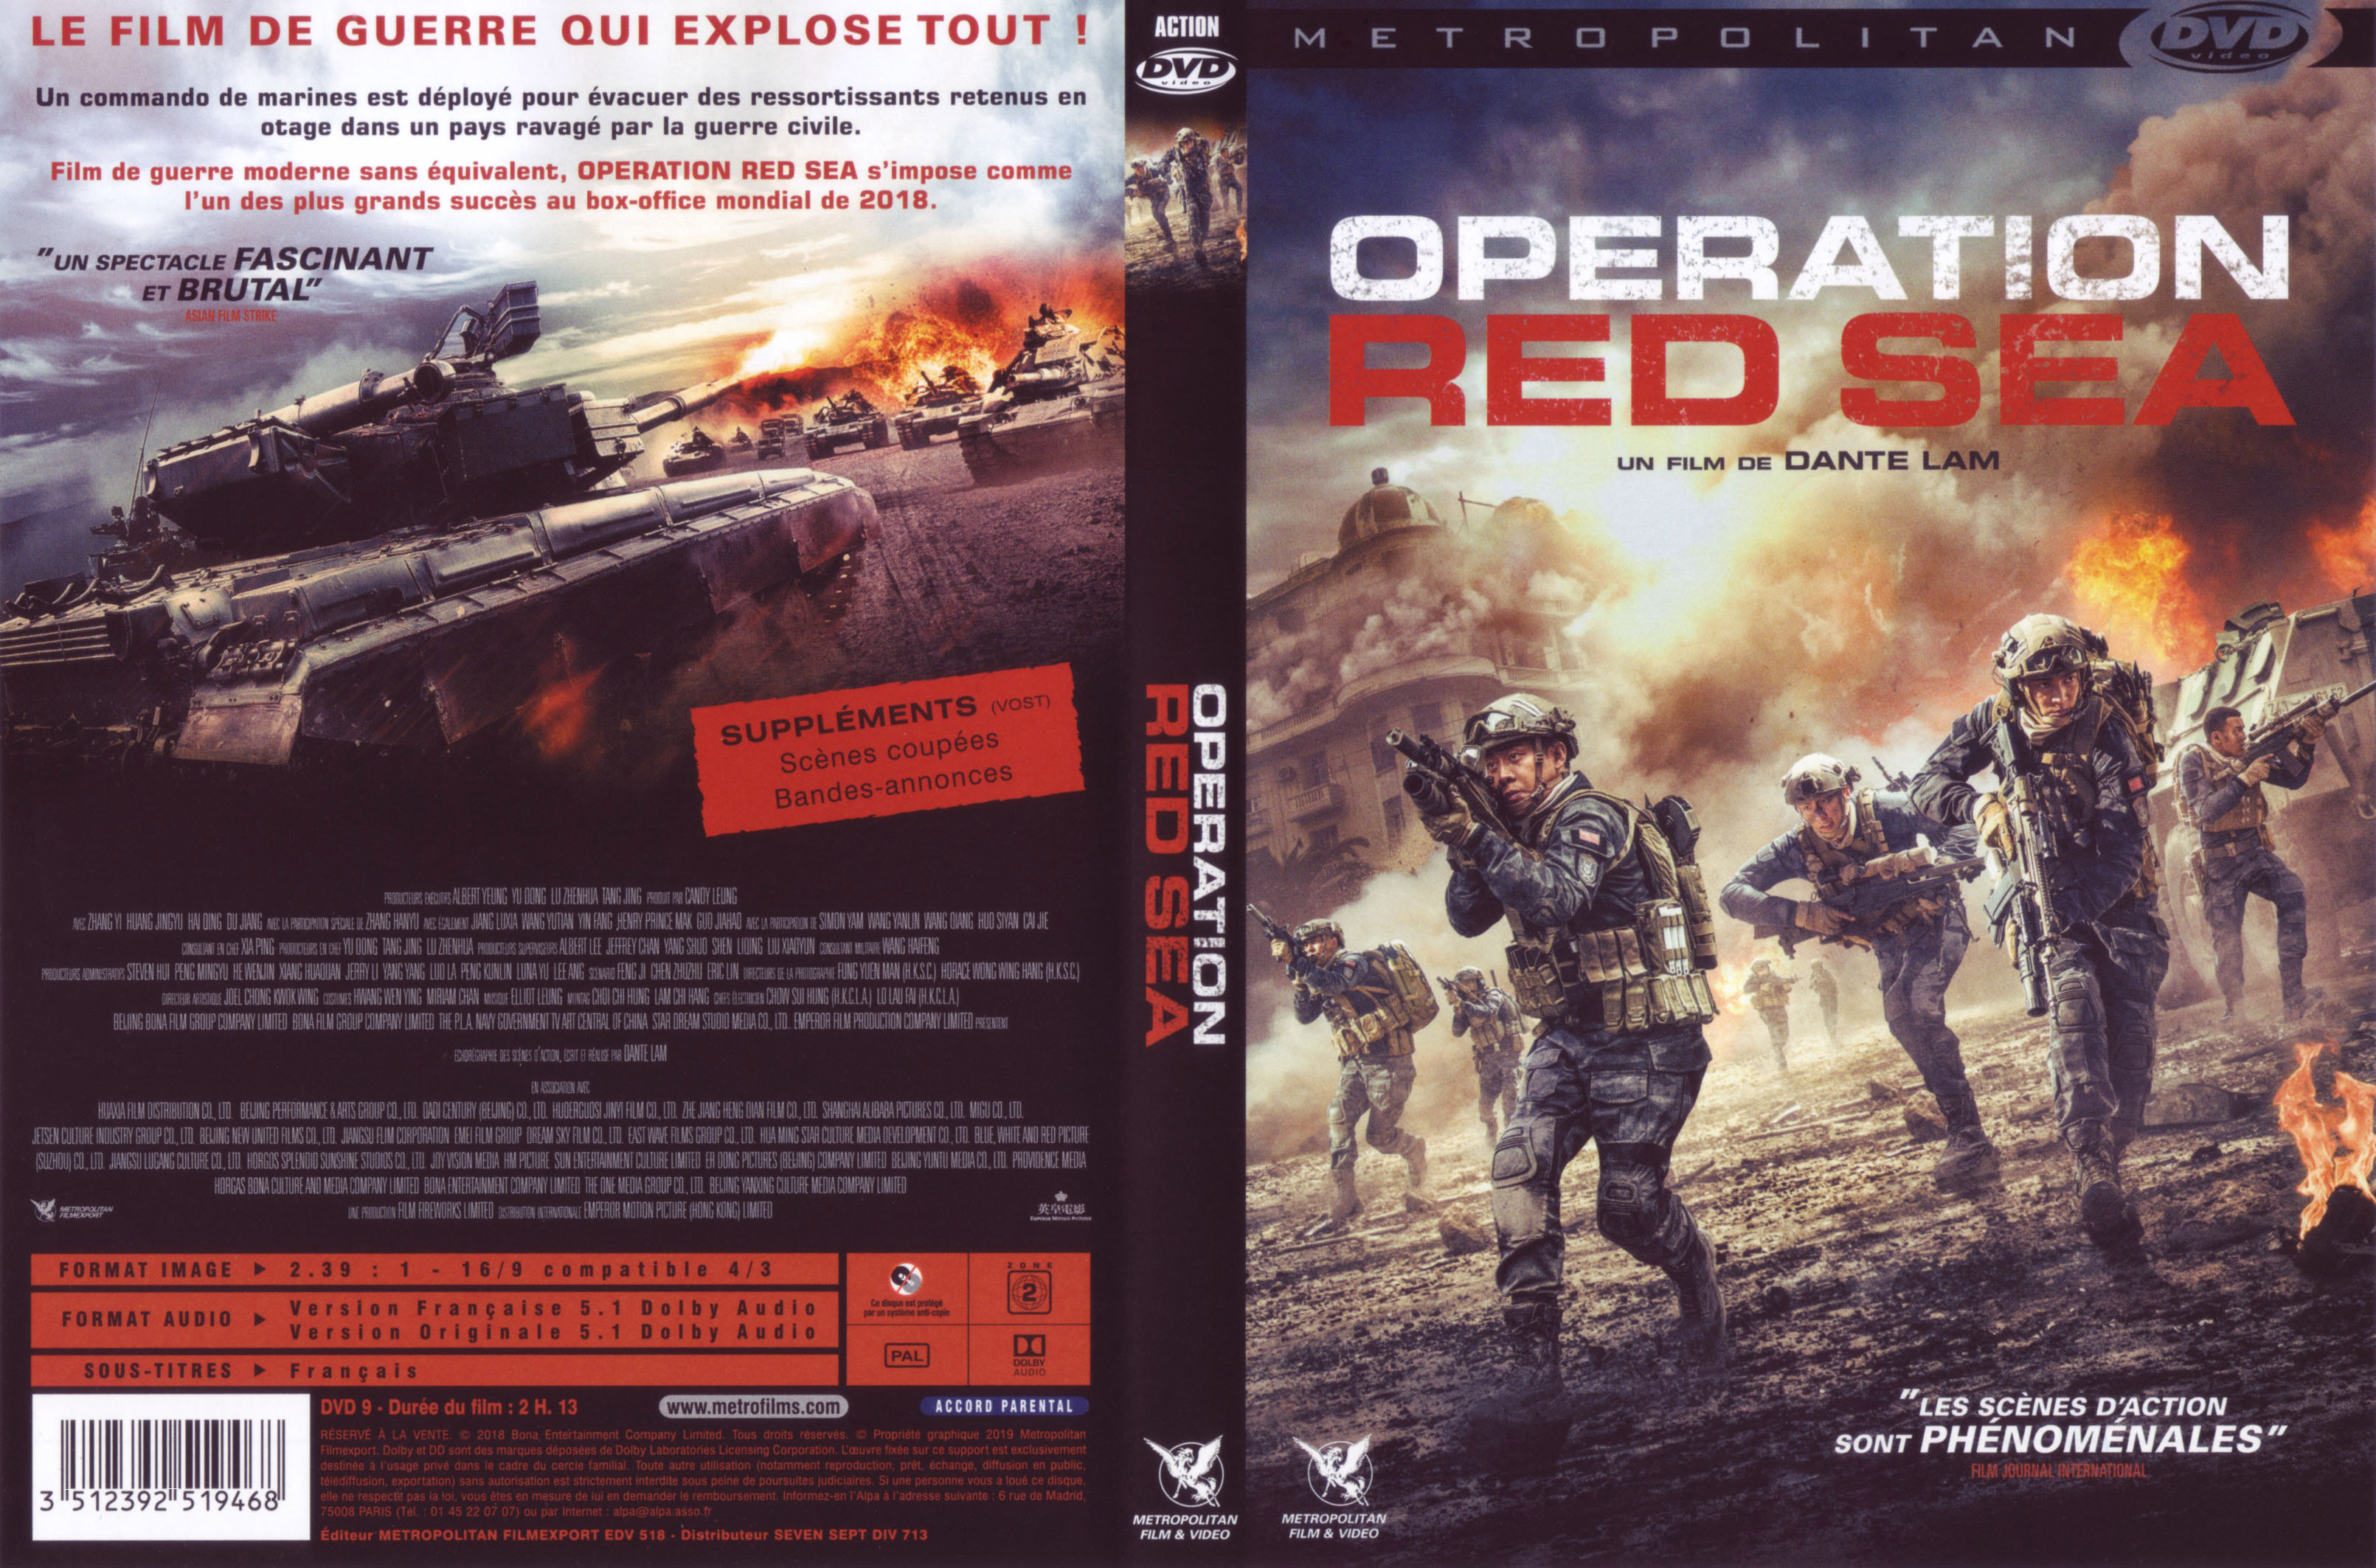 Jaquette DVD Operation red sea